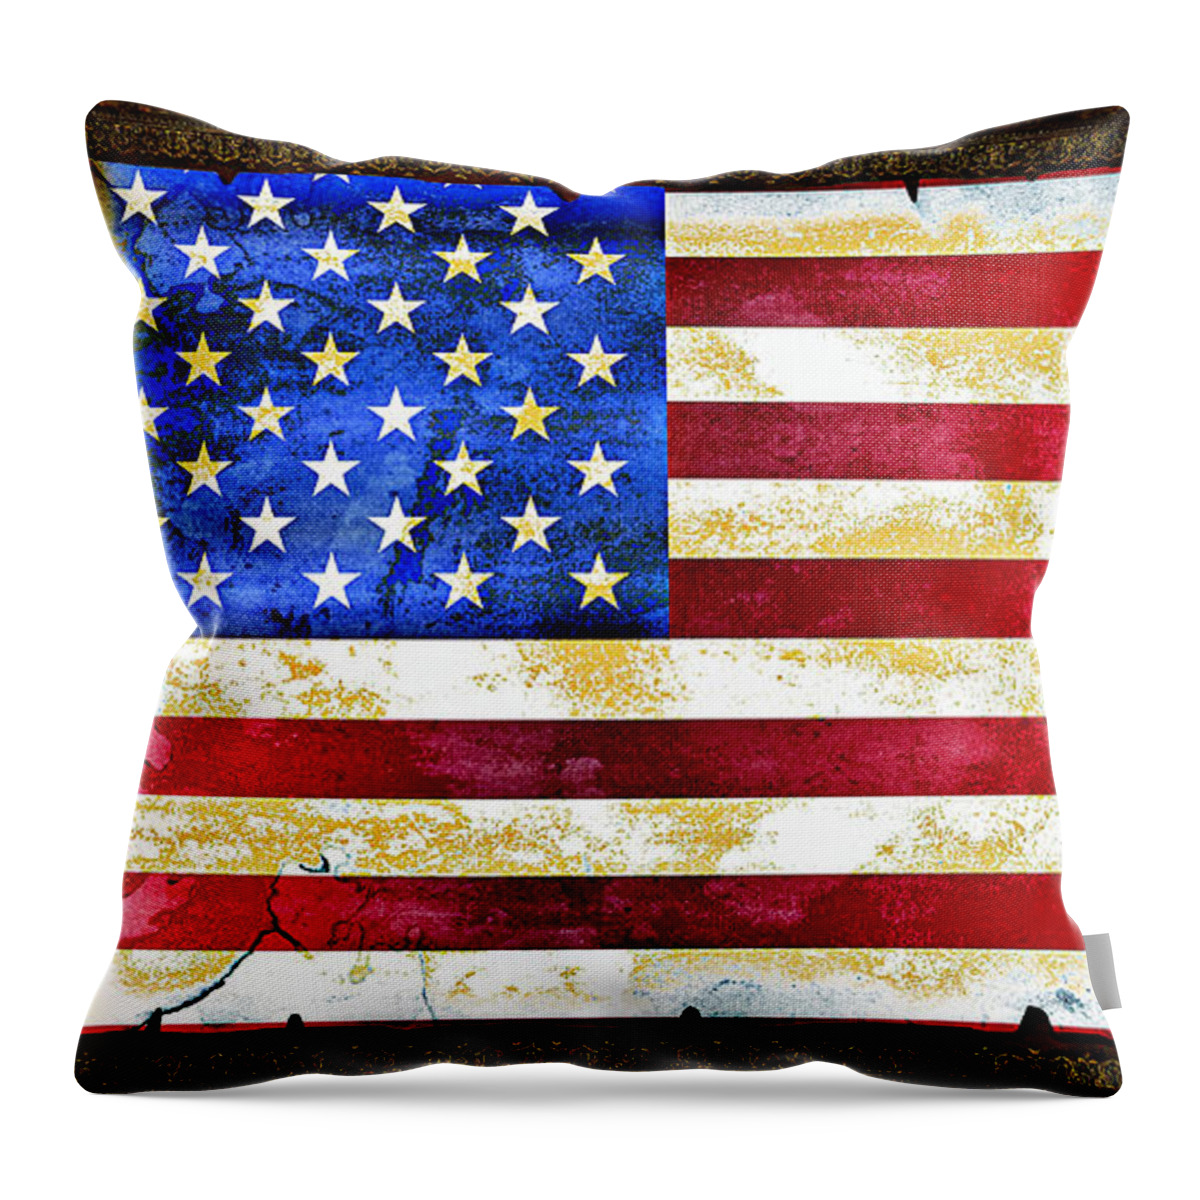 America Throw Pillow featuring the digital art USA Flag On Scroll by Michelle Liebenberg